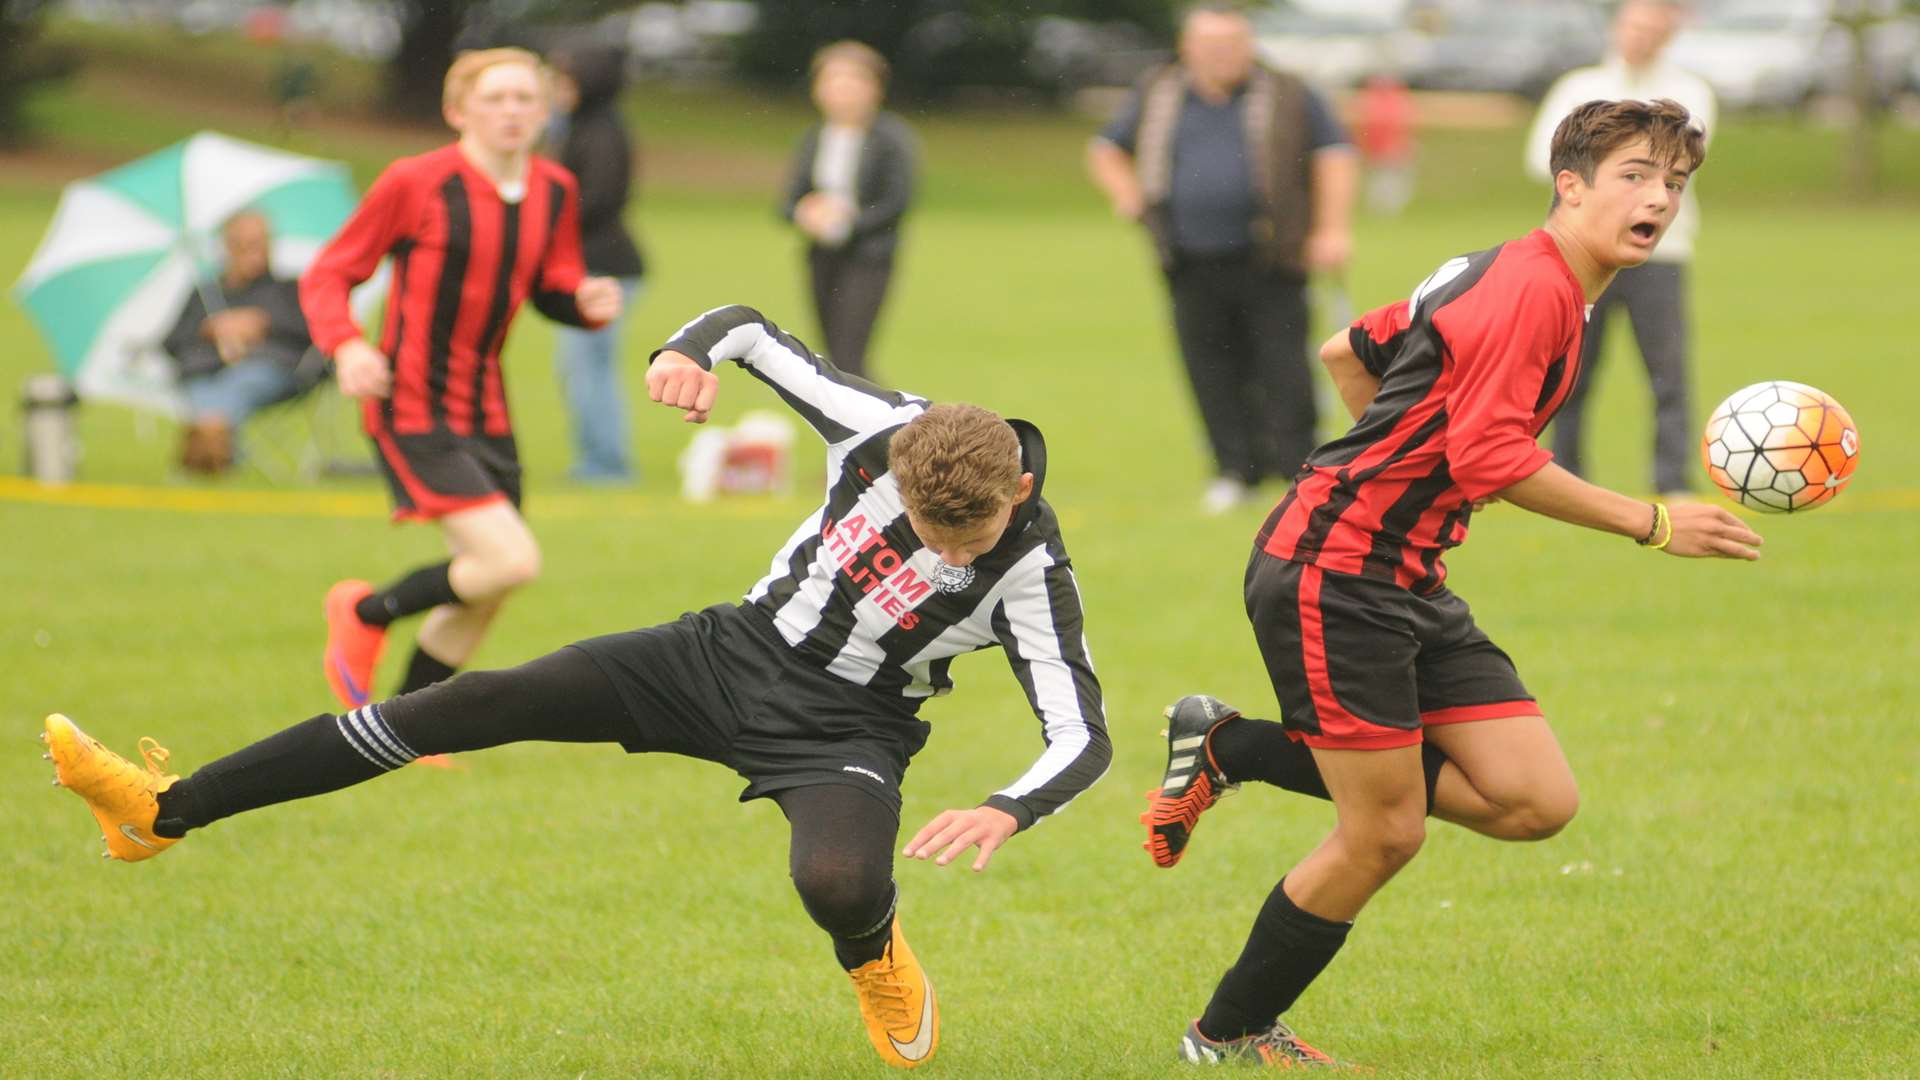 Meopham Colts under-15s, red, get away from Real 60 in Sunday's Division 2 clash Picture: Steve Crispe